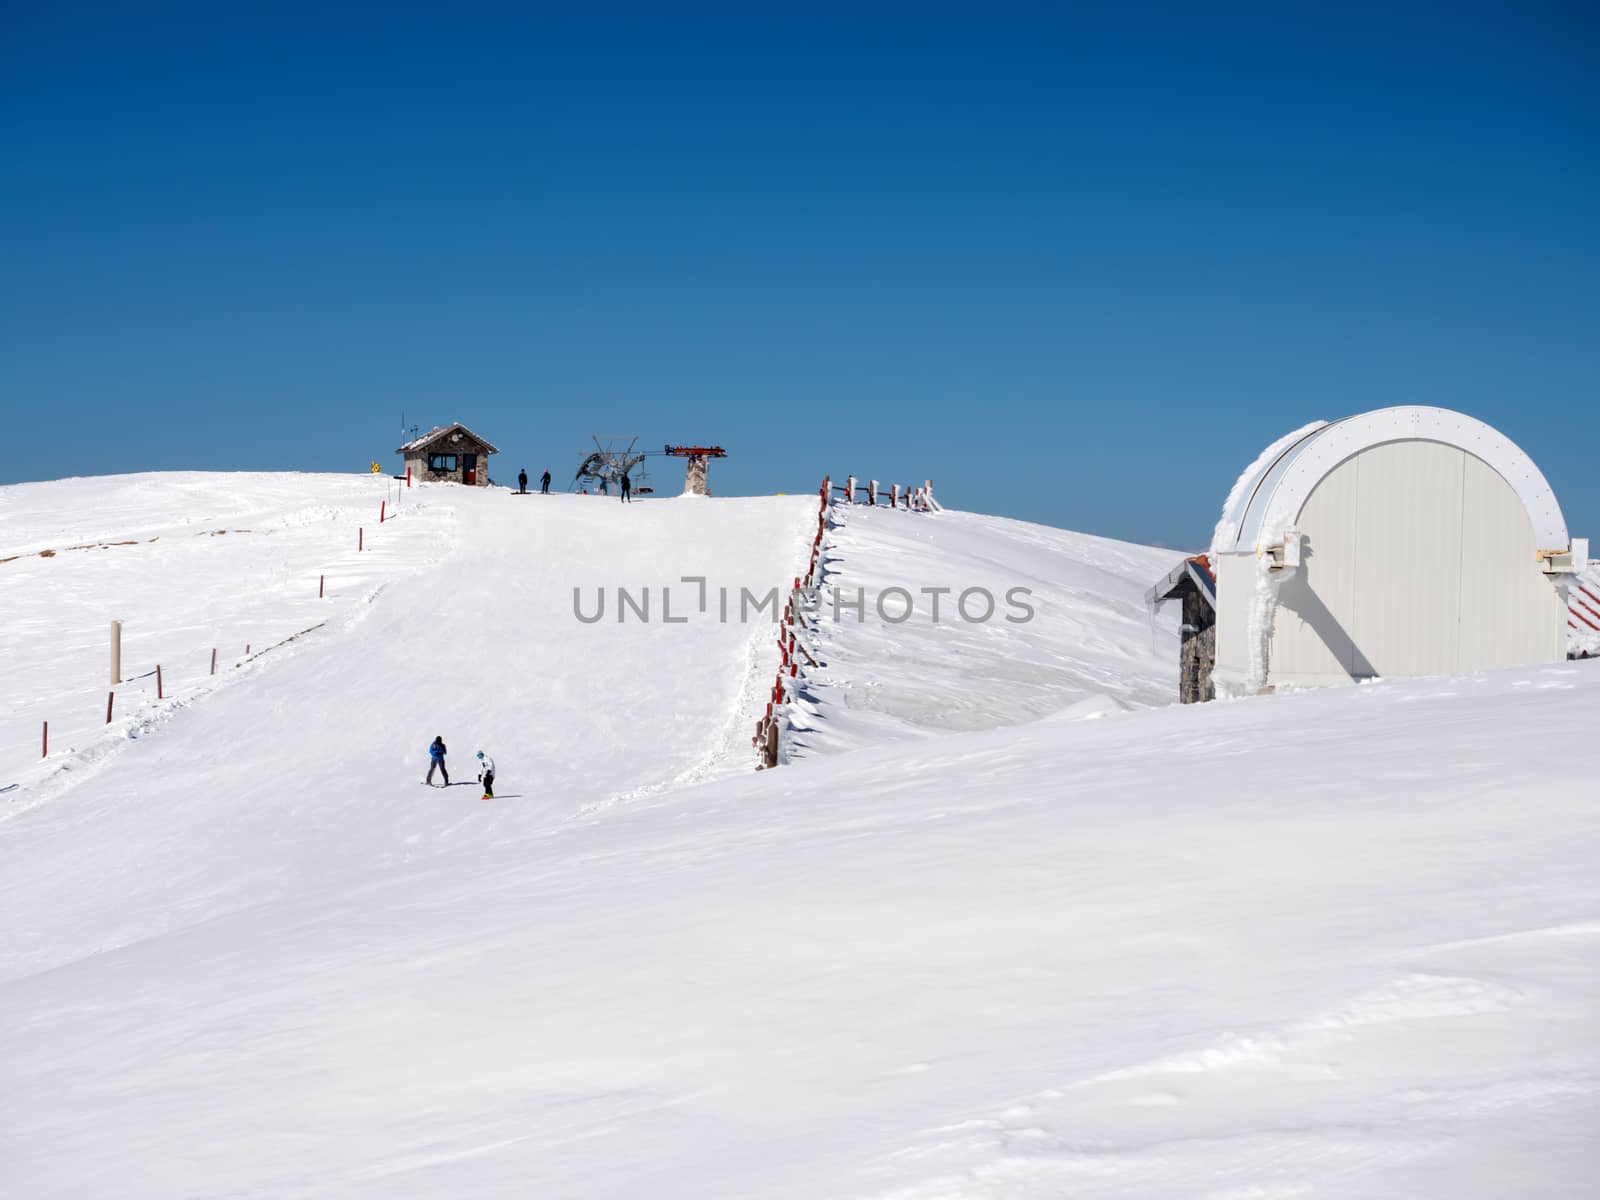 Snowboarders and skiers at the top of the mountain in Kalavrita ski resort
